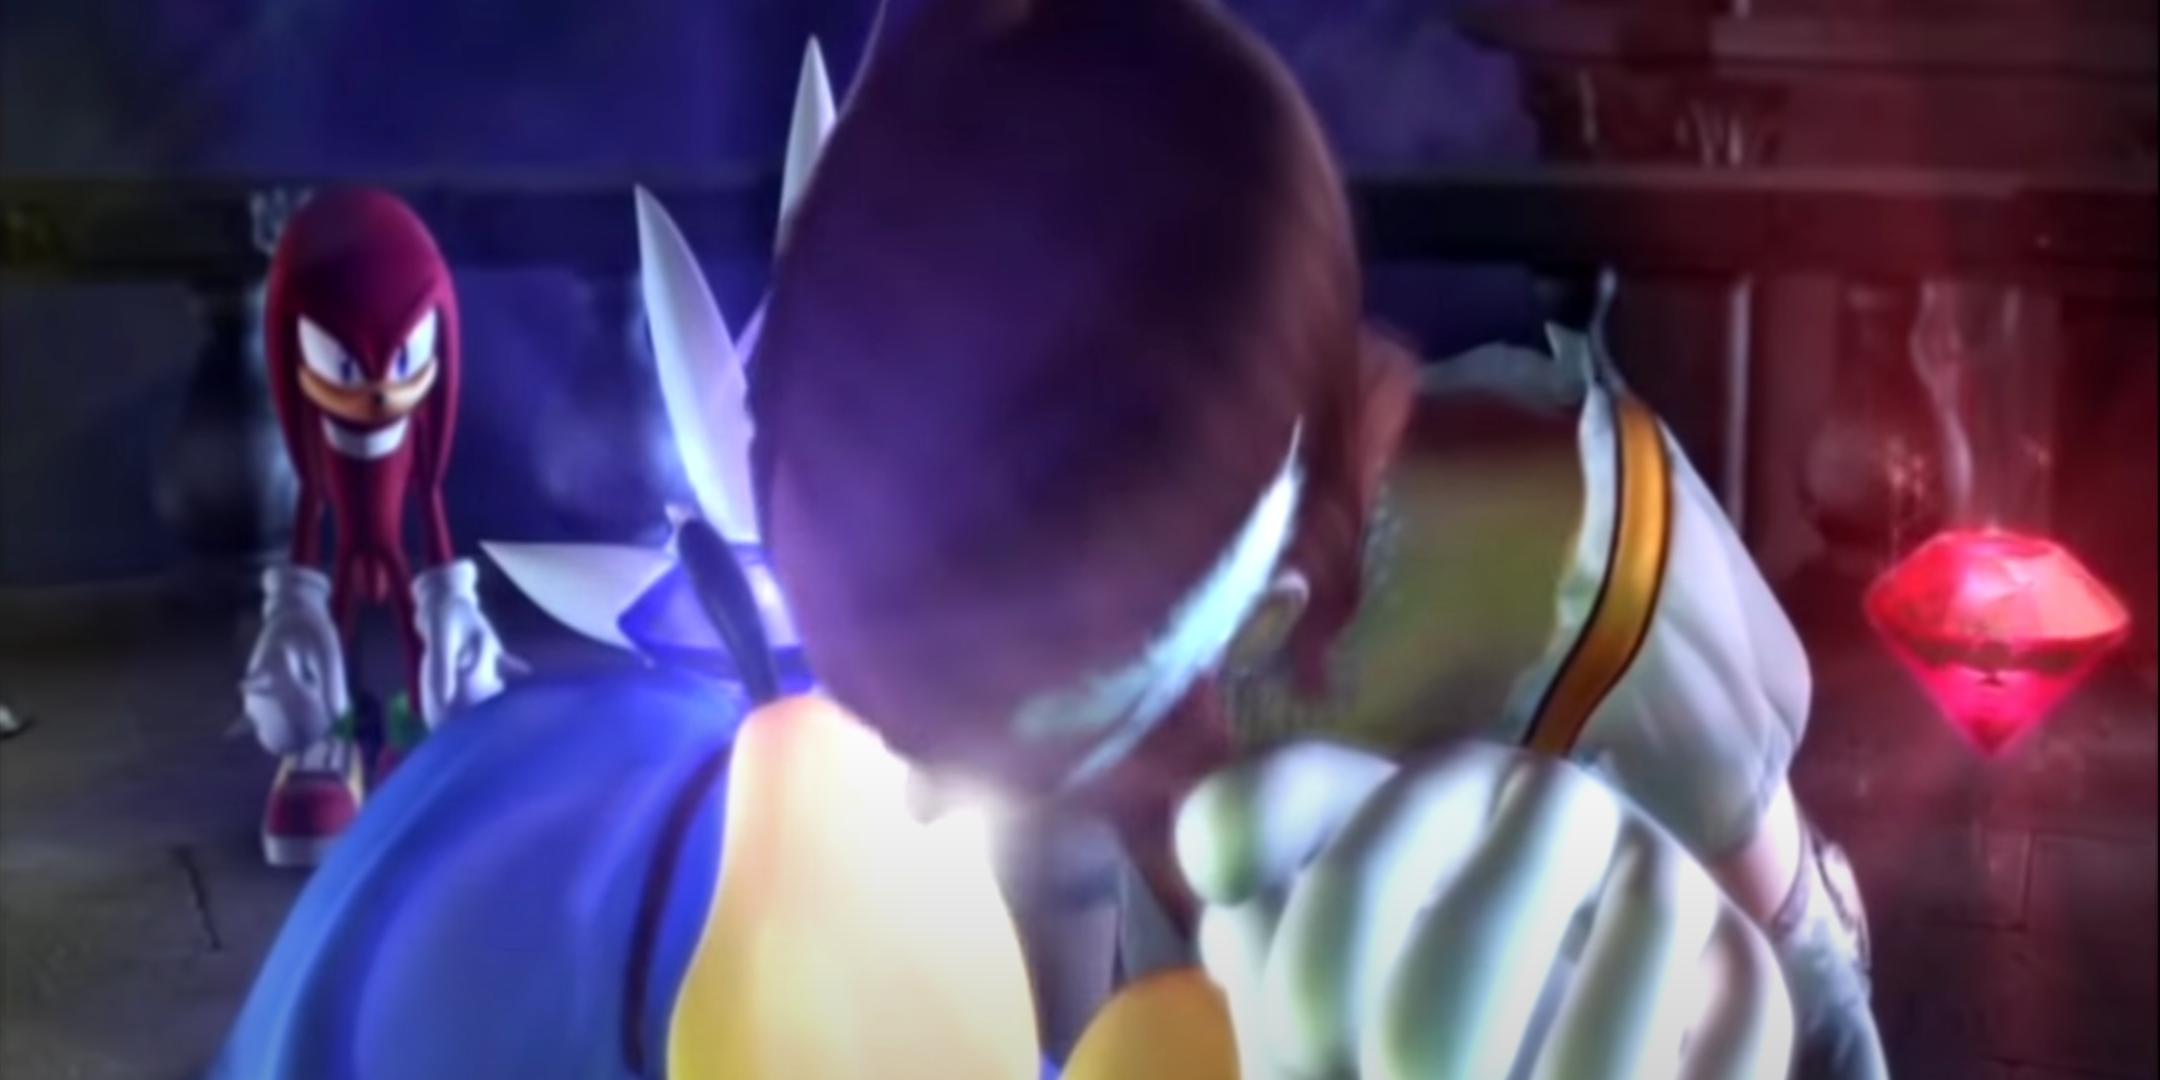 A cutscene still from Sonic 2006, featuring Princess Elise kissing Sonic as Knuckles looks on in the background.